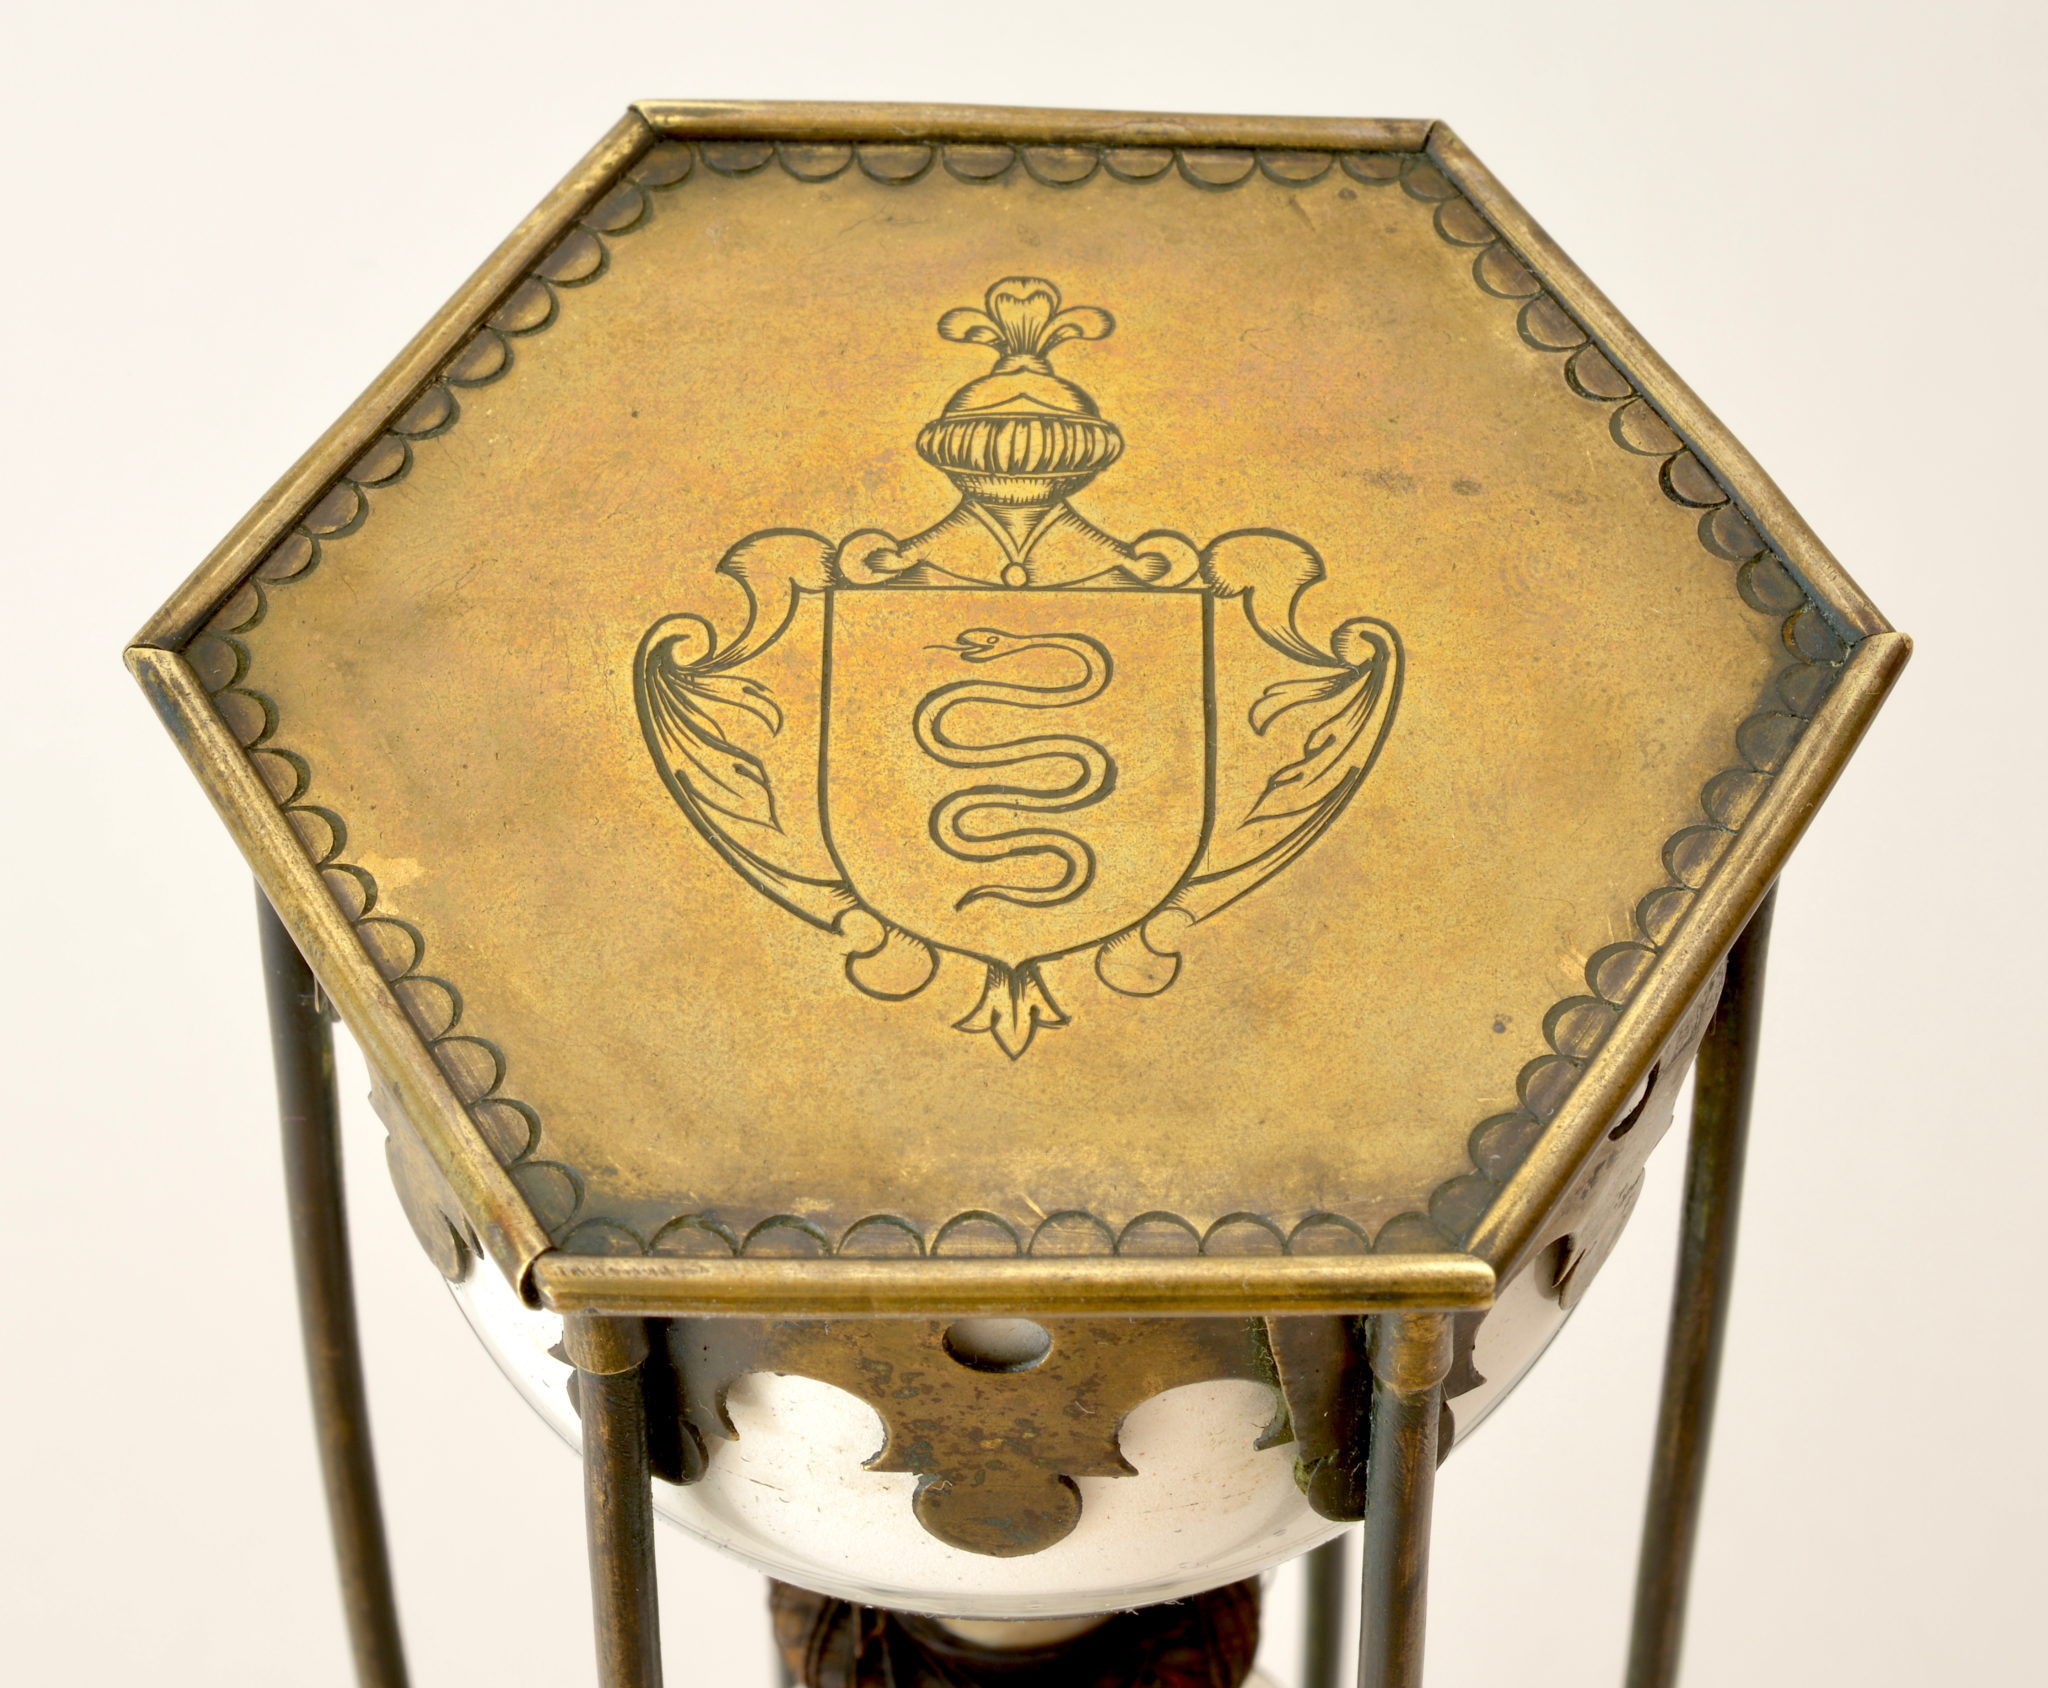 Large brass hourglass with coat-of-arms of Colbert family made circa 1680.